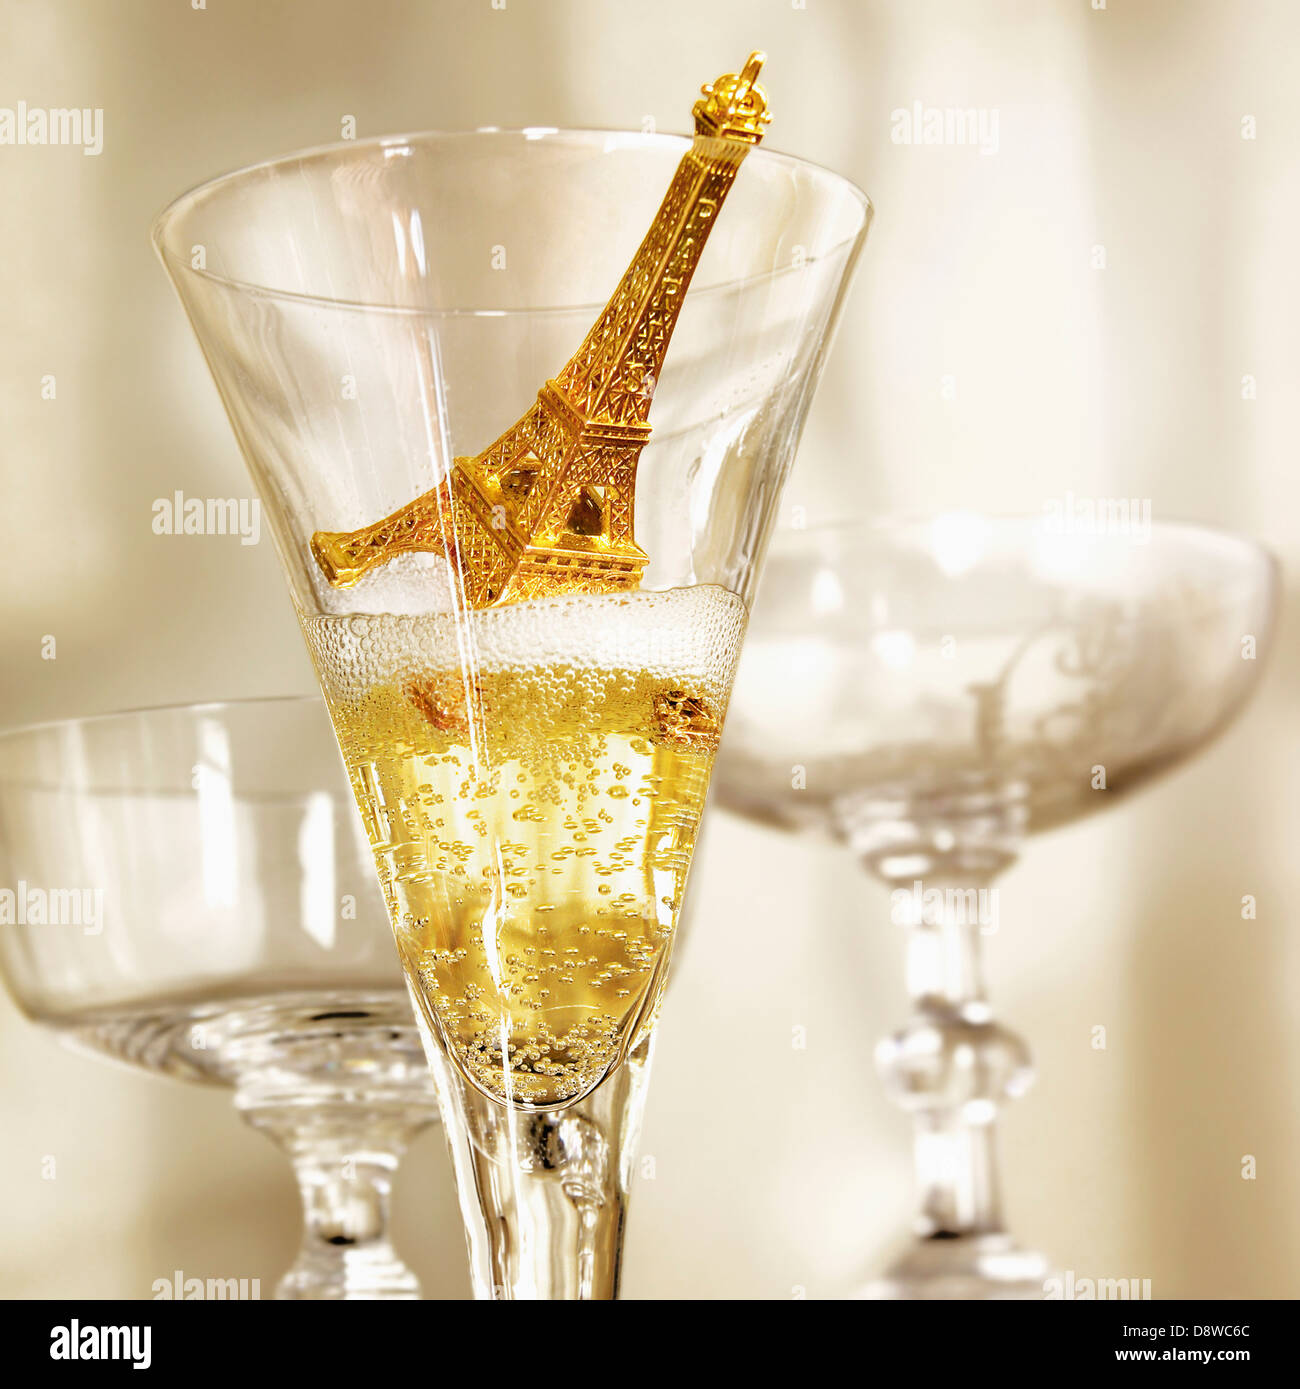 Small Eiffel tower in a glass of Champagne Stock Photo